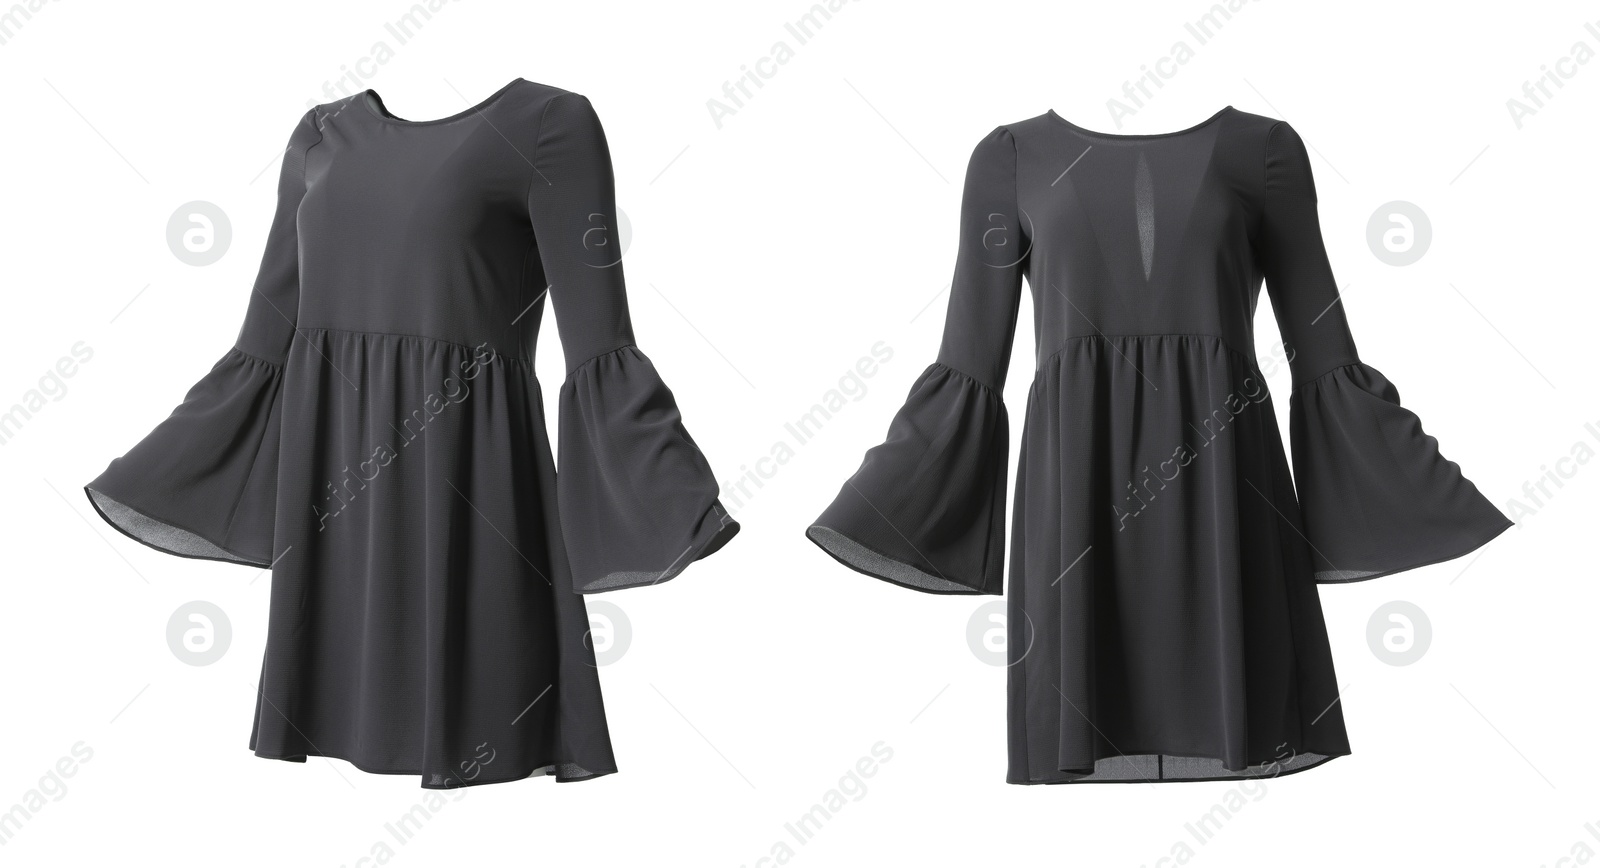 Image of Beautiful short black dresses from different views on white background